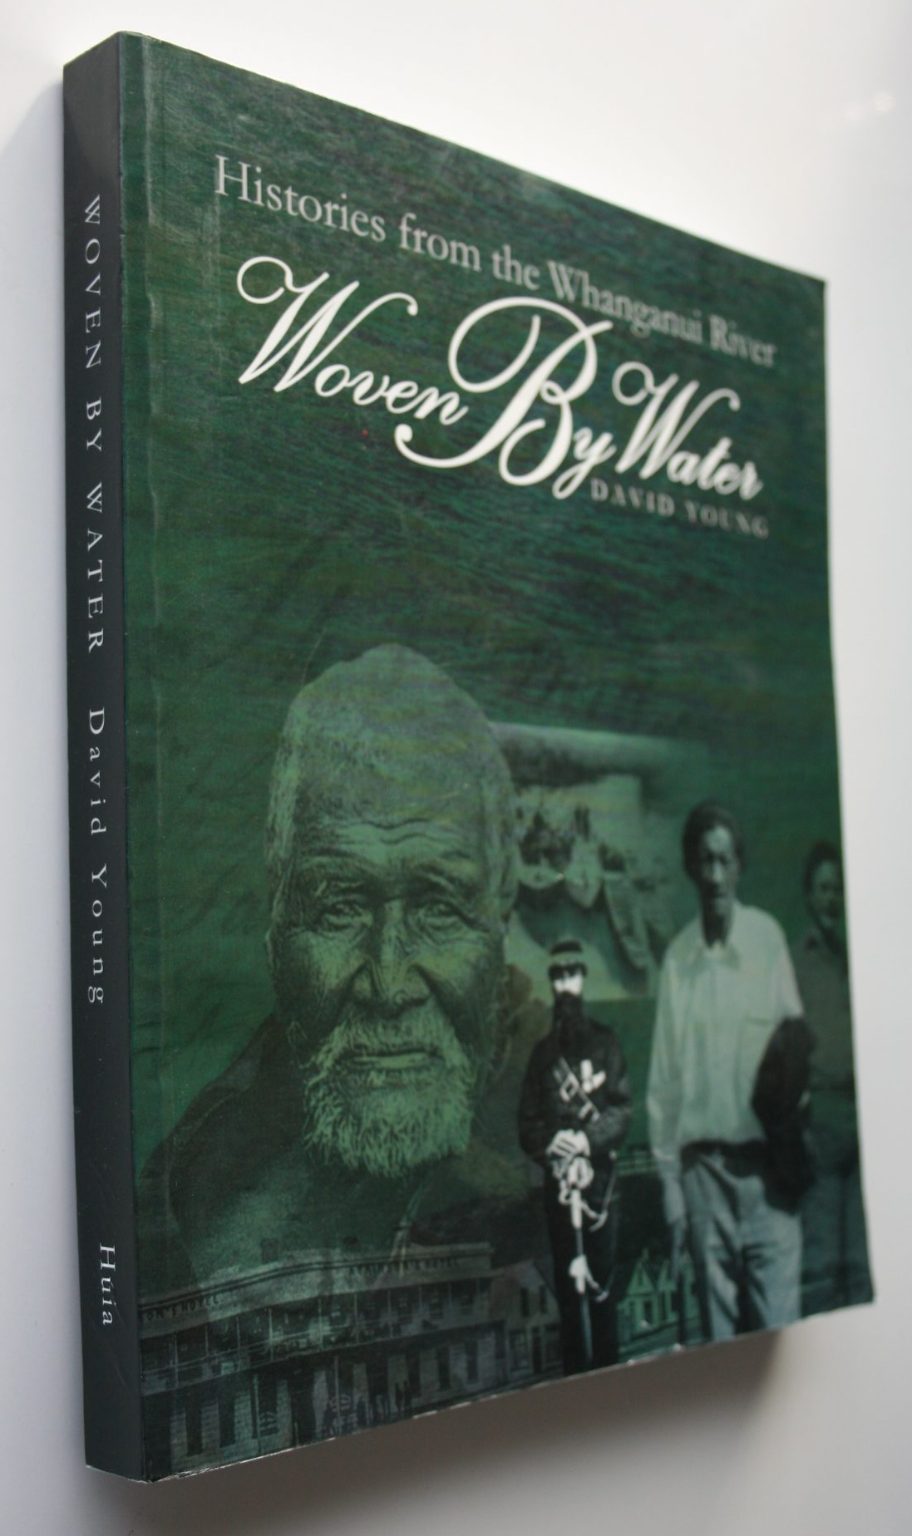 Woven by Water: Histories from the Whanganui River By David Young. VERY SCARCE.